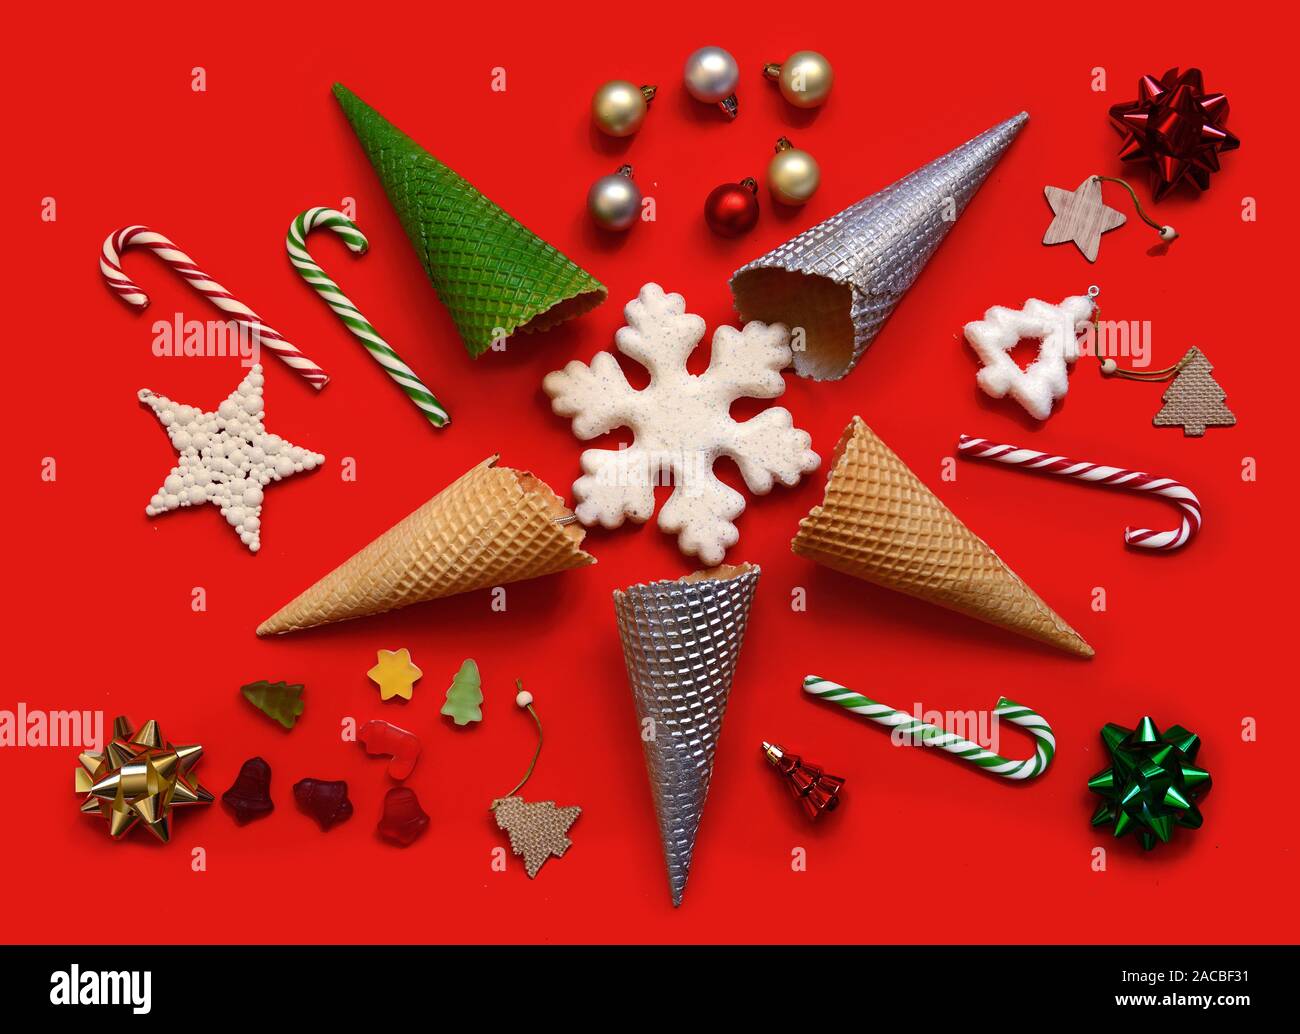 Christmas decorative creative background with various Christmas objects Stock Photo